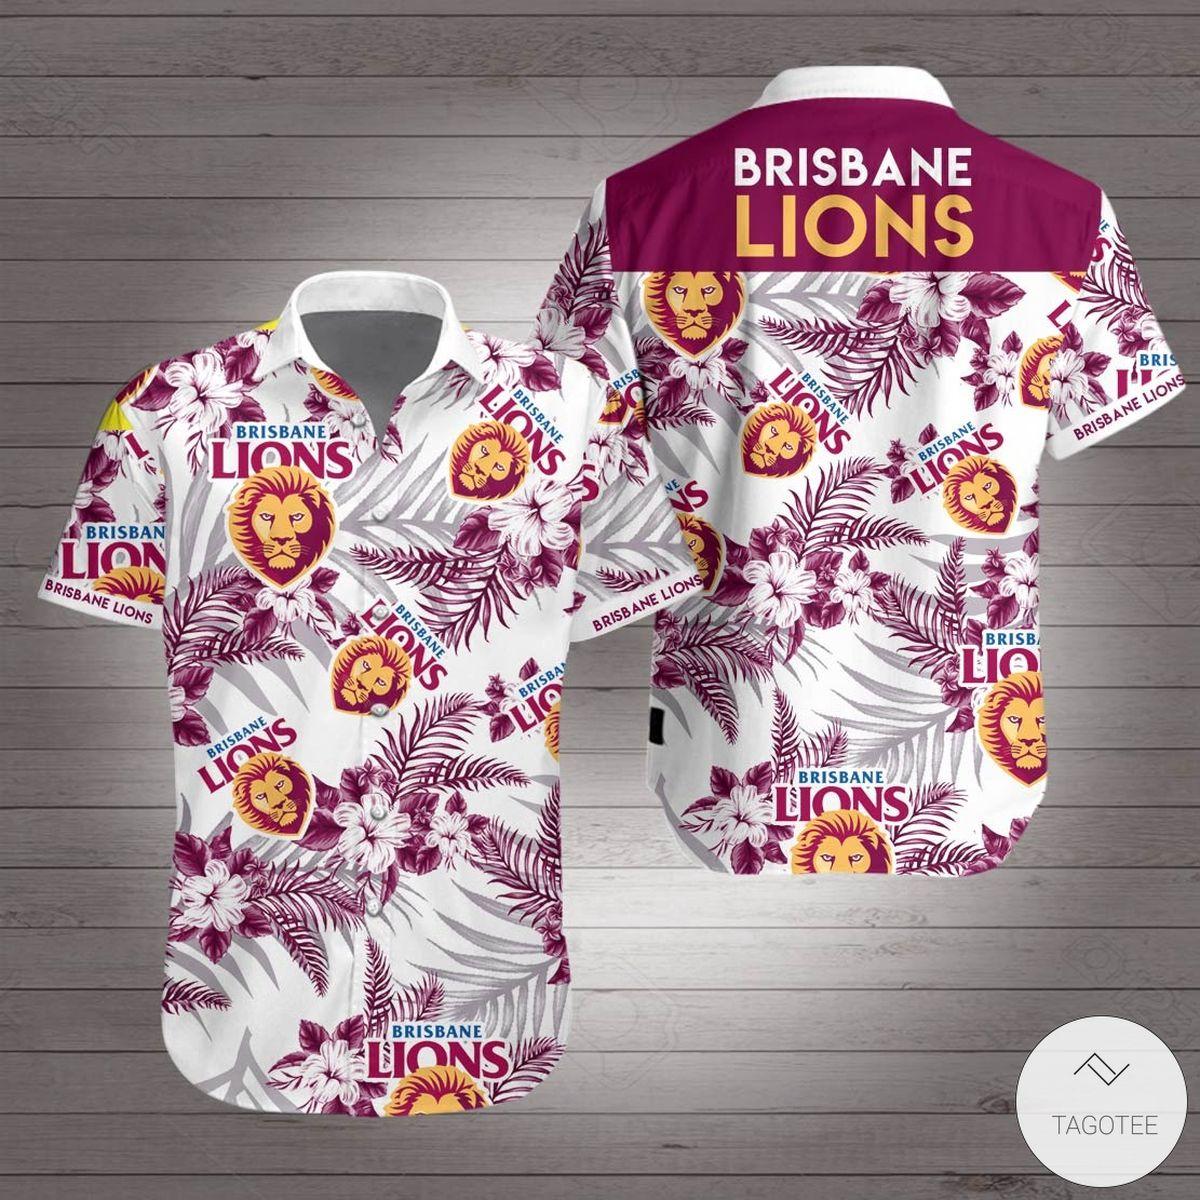 Afl Carlton Blues Anzac Day Simple Style Hawaiian Shirt Size From S To 5xl